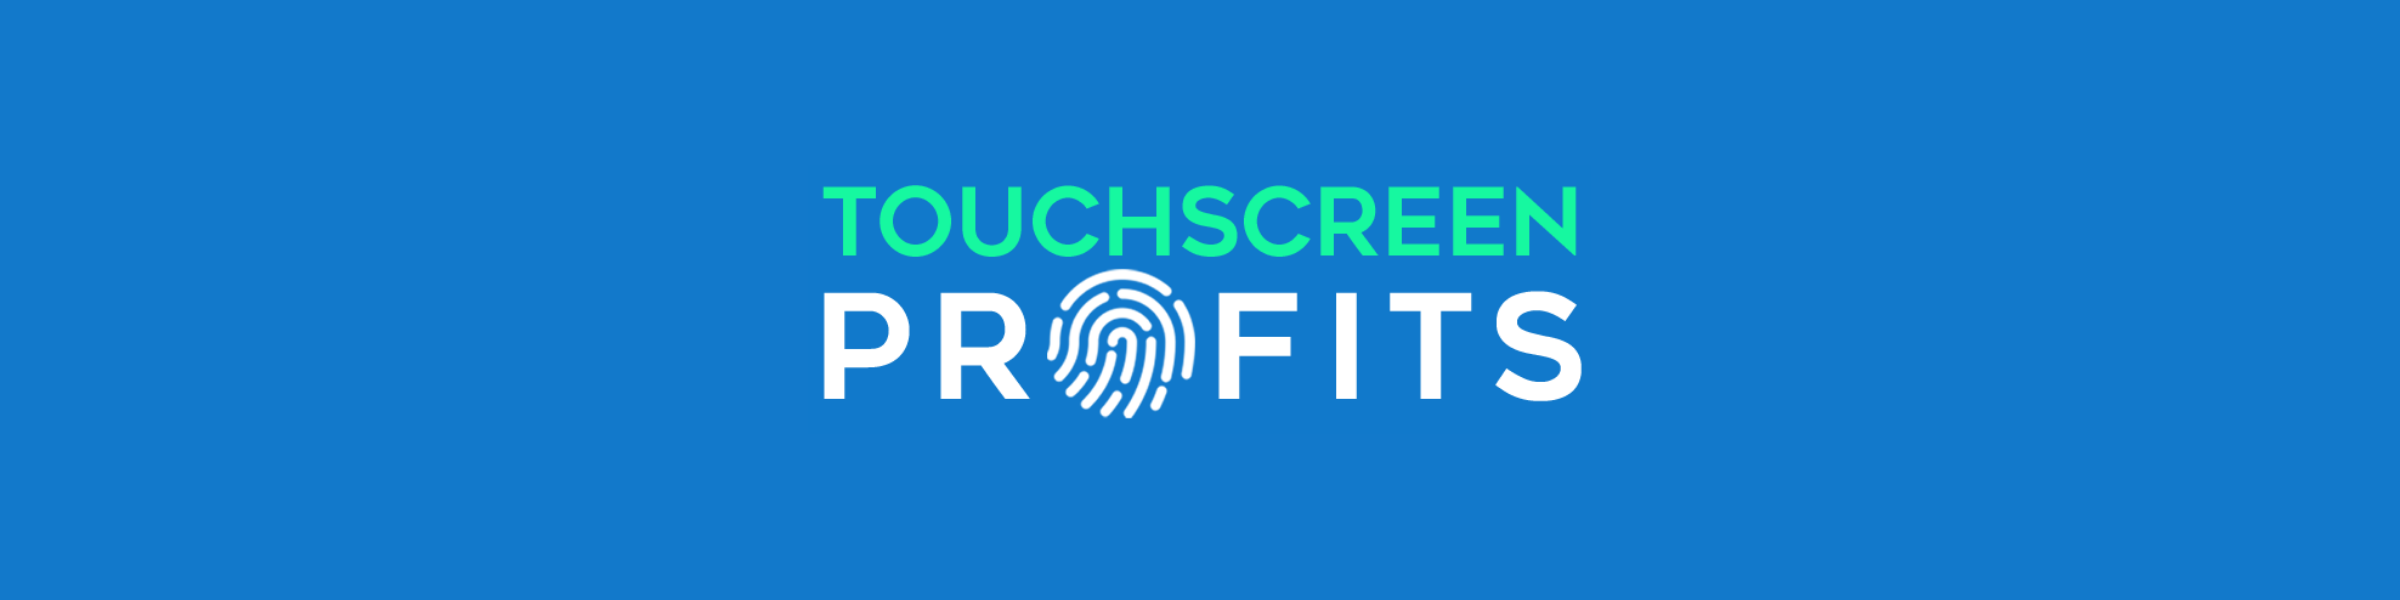 Announcing: “Touchscreen Profits” by Lee Arnold